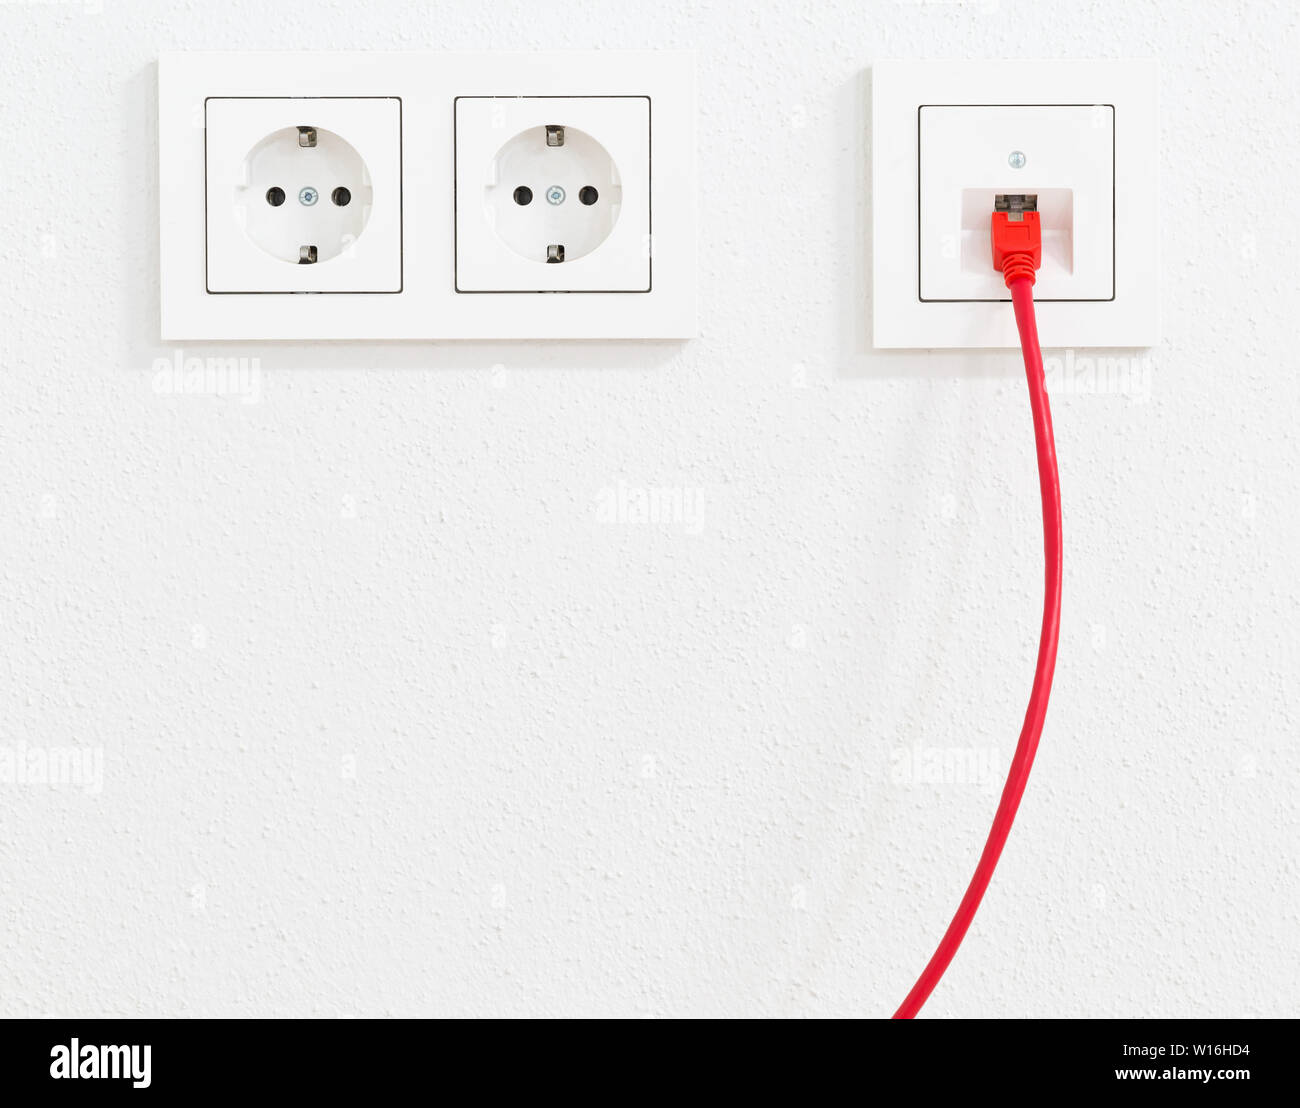 Red network cable in wall outlet for office or private home lan ethernet  connection with power outlets flat view on white plaster wall background  Stock Photo - Alamy